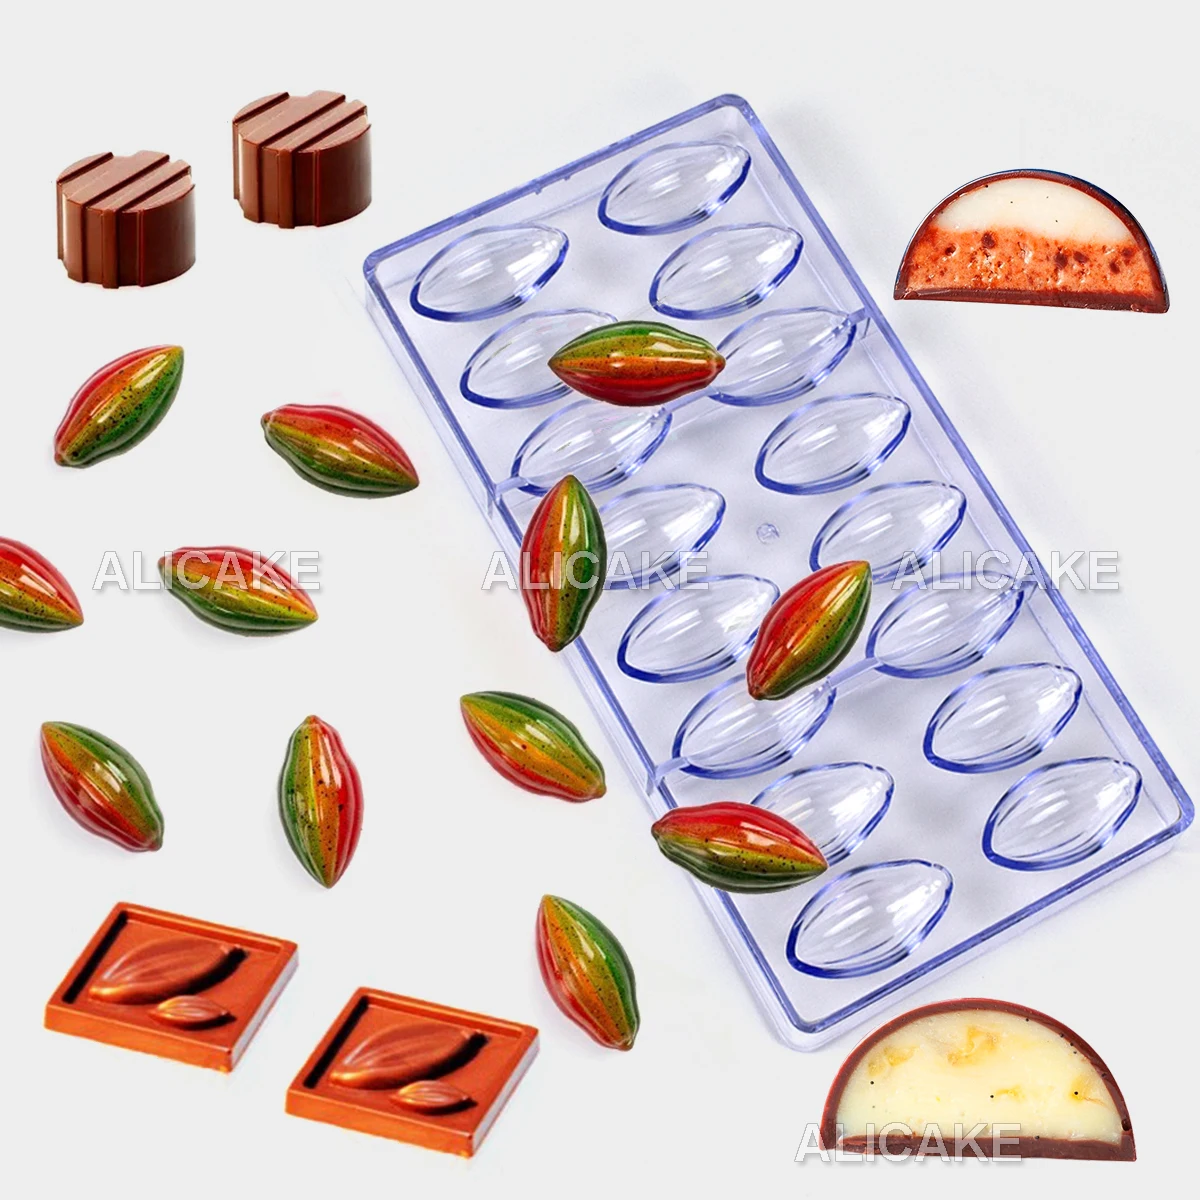 Chocolate World Polycarbonate Chocolate Mold, Cocoa Bean & Leaves Bar, 6  Cavities Polycarbonate Chocolate Molds